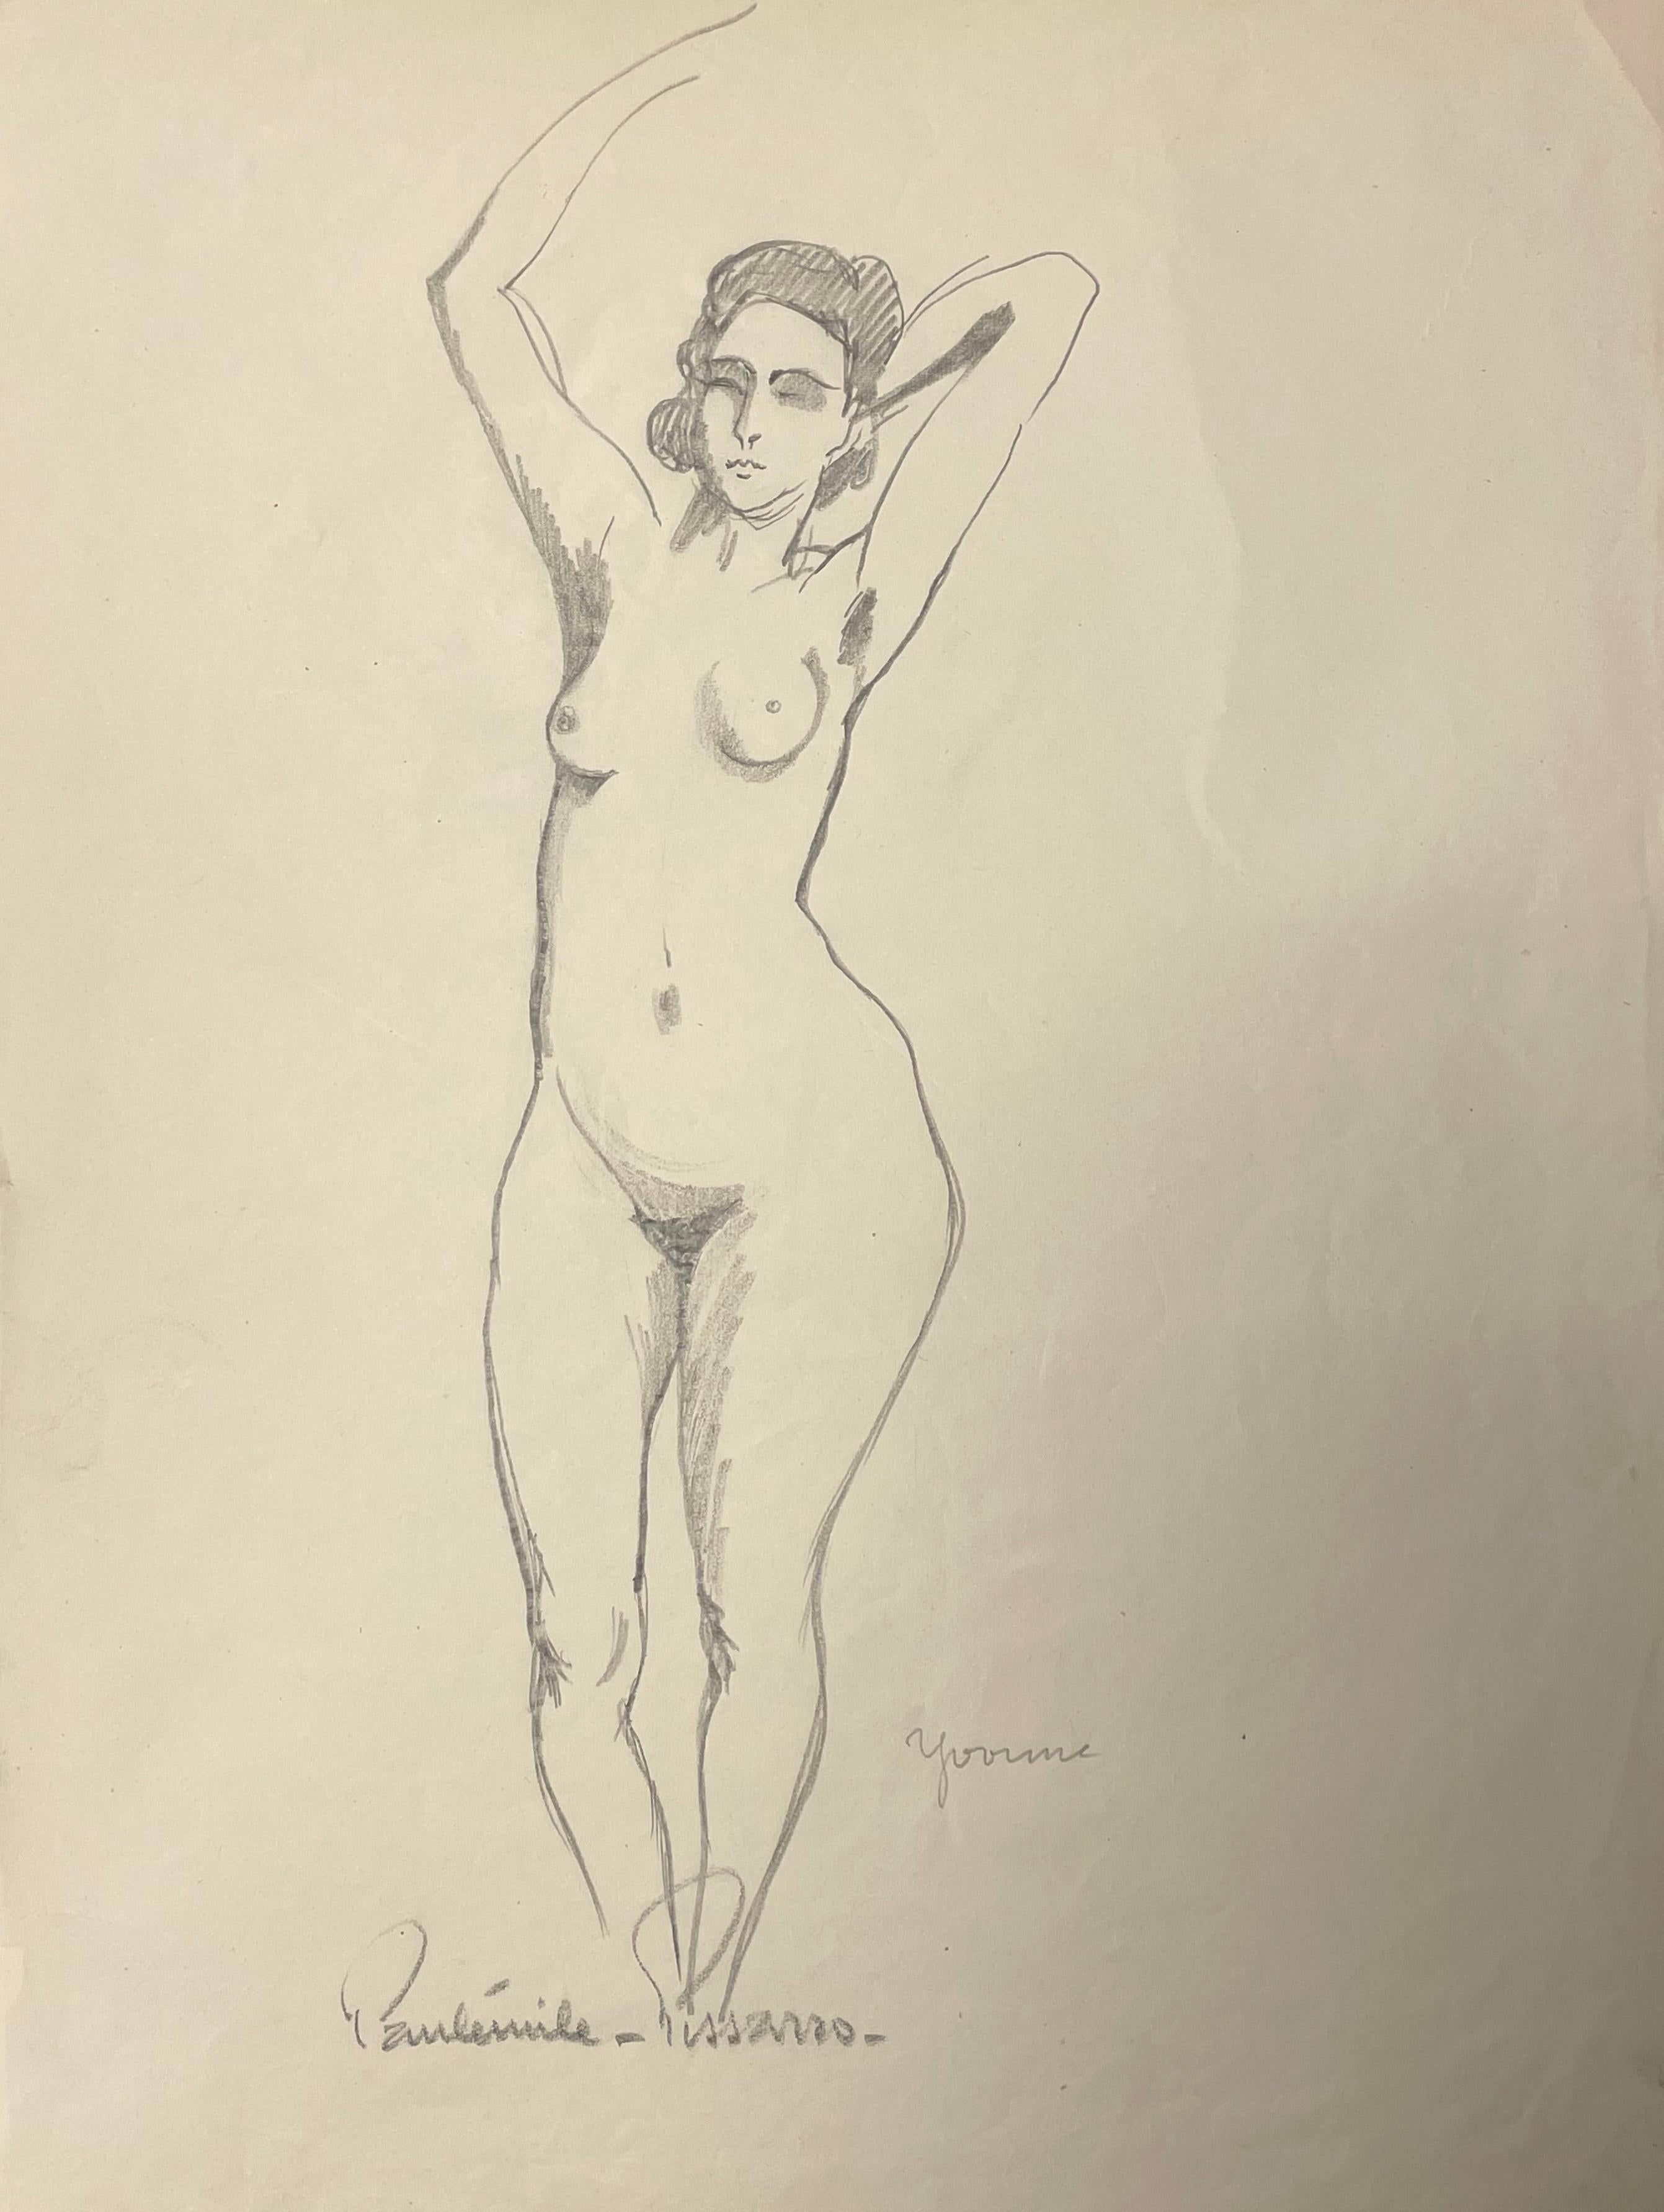 Yvonne debout by Paulémile Pissarro - Nude drawing of the artist's wife - Art by Paul Emile Pissarro